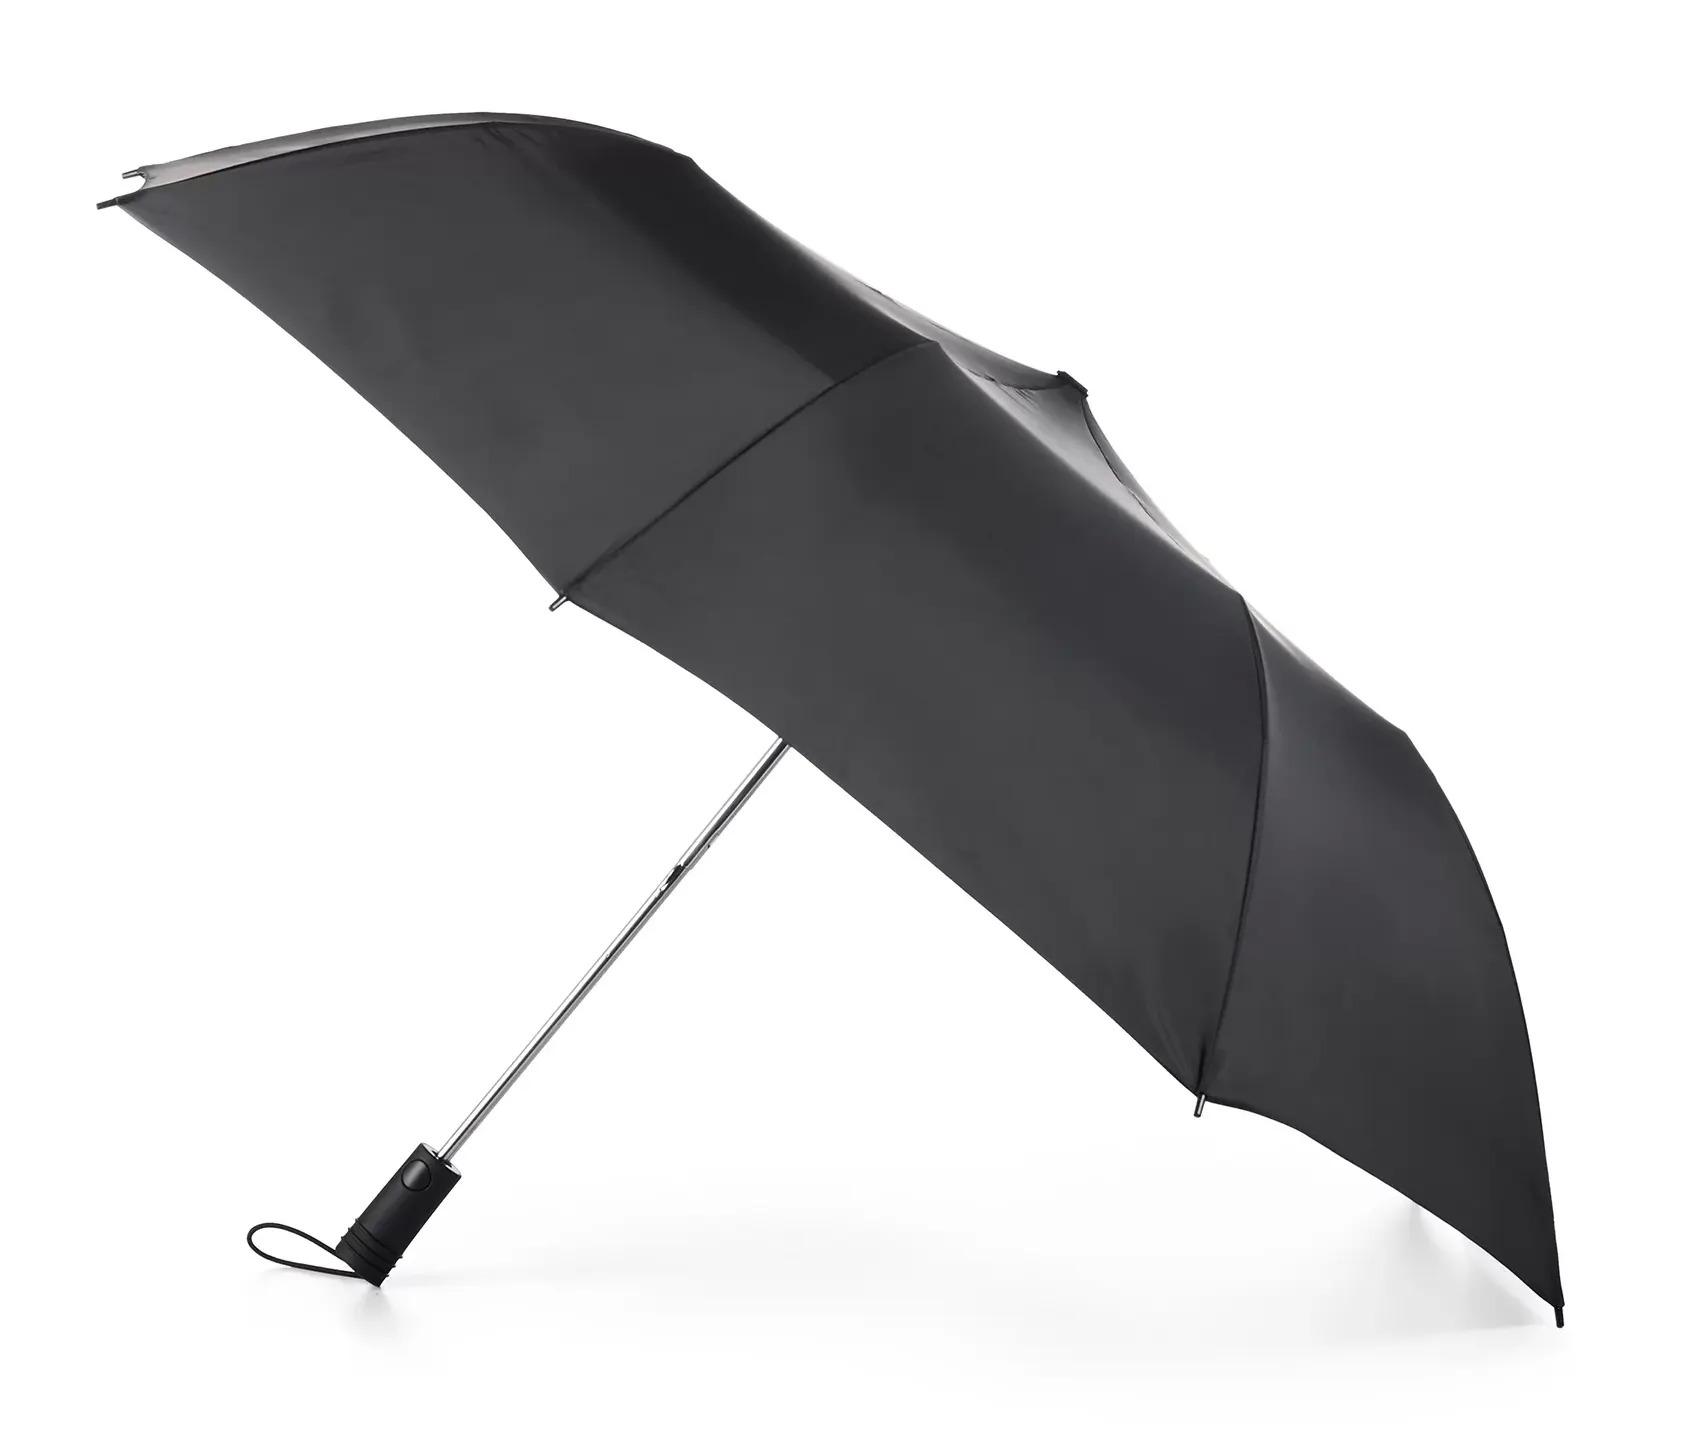 Totes One-Touch Auto Open Golf Umbrella for $7